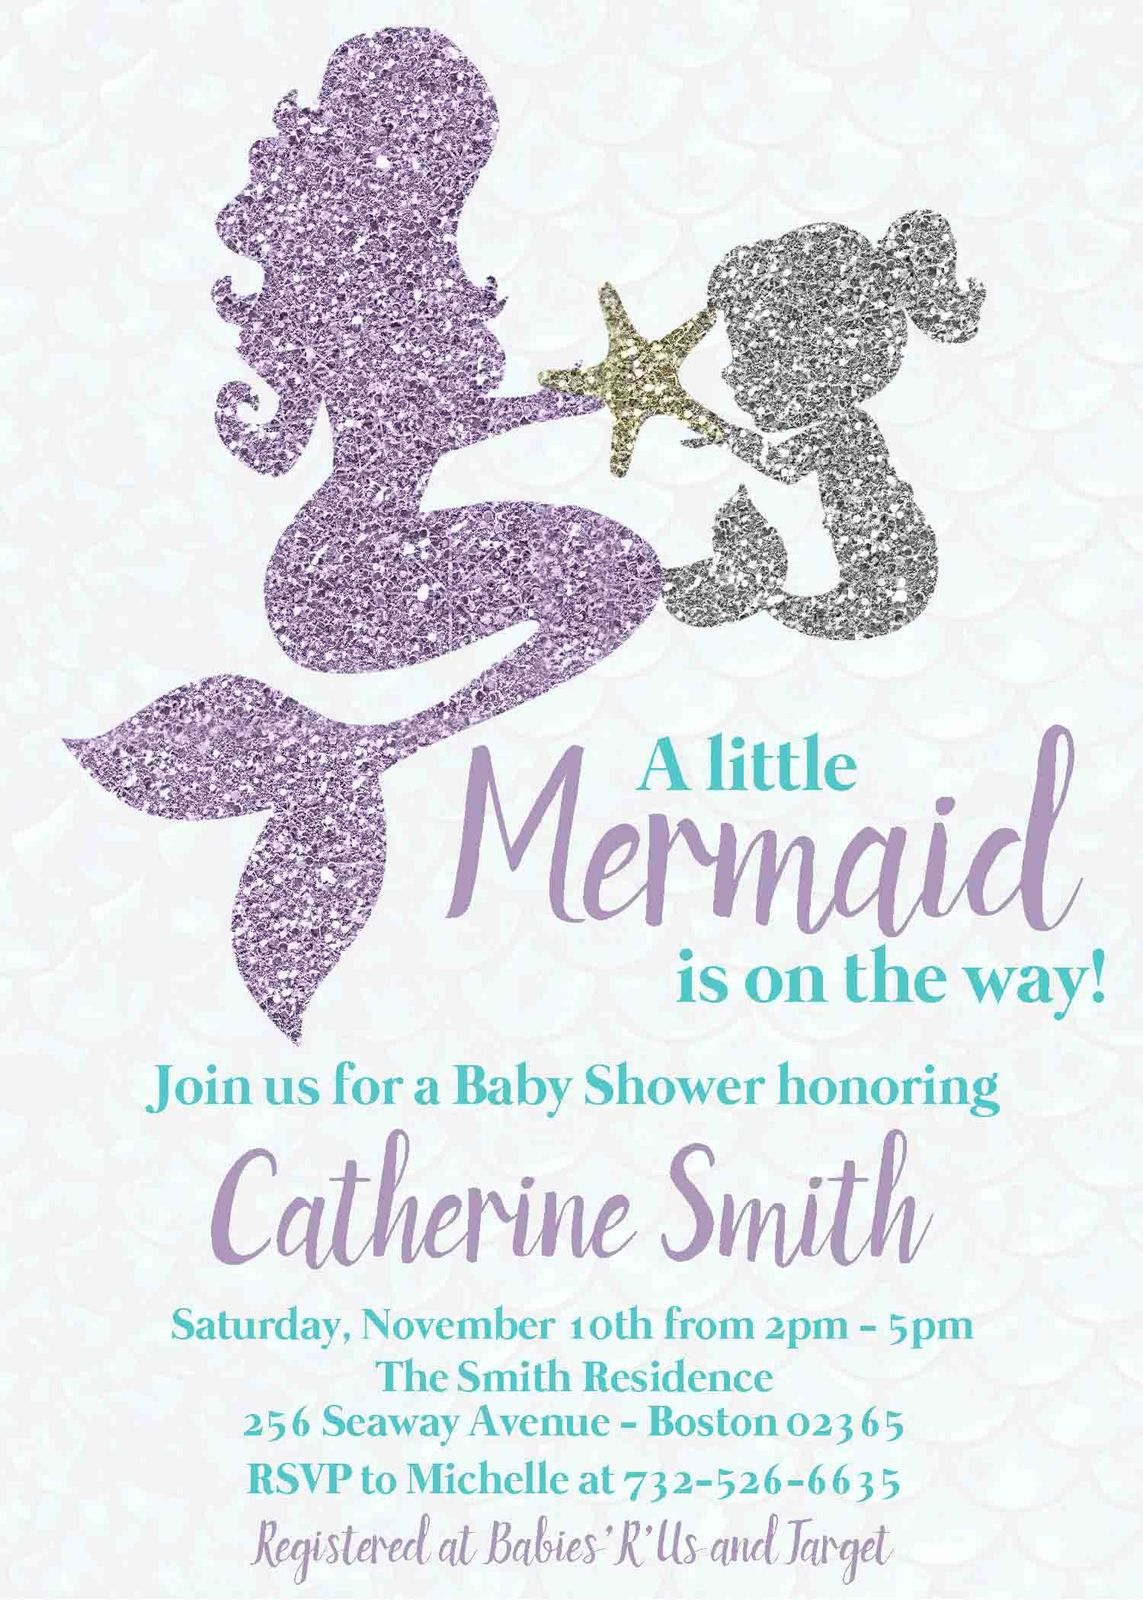 Full Size of Baby Shower:nautical Baby Shower Invitations For Boys Baby Girl Themes For Bedroom Baby Shower Ideas Baby Shower Decorations Themes For Baby Girl Nursery Elegant Baby Shower Nursery For Girls Baby Shower Ideas Baby Shower Invitations For Boys